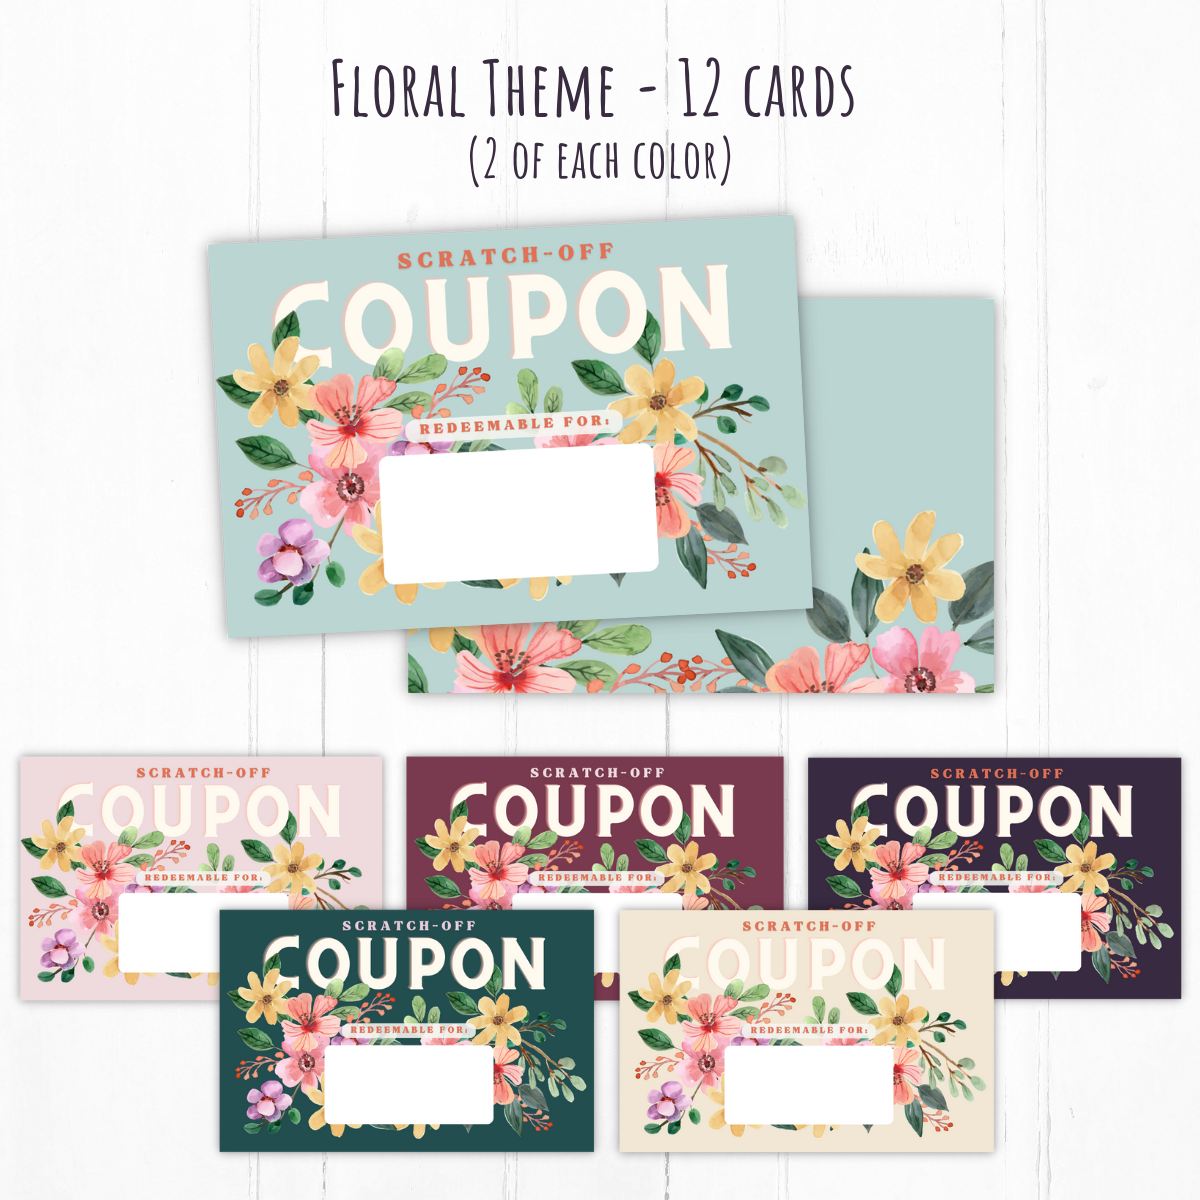 Mother's and Father's Day Scratch-off Coupon Sets